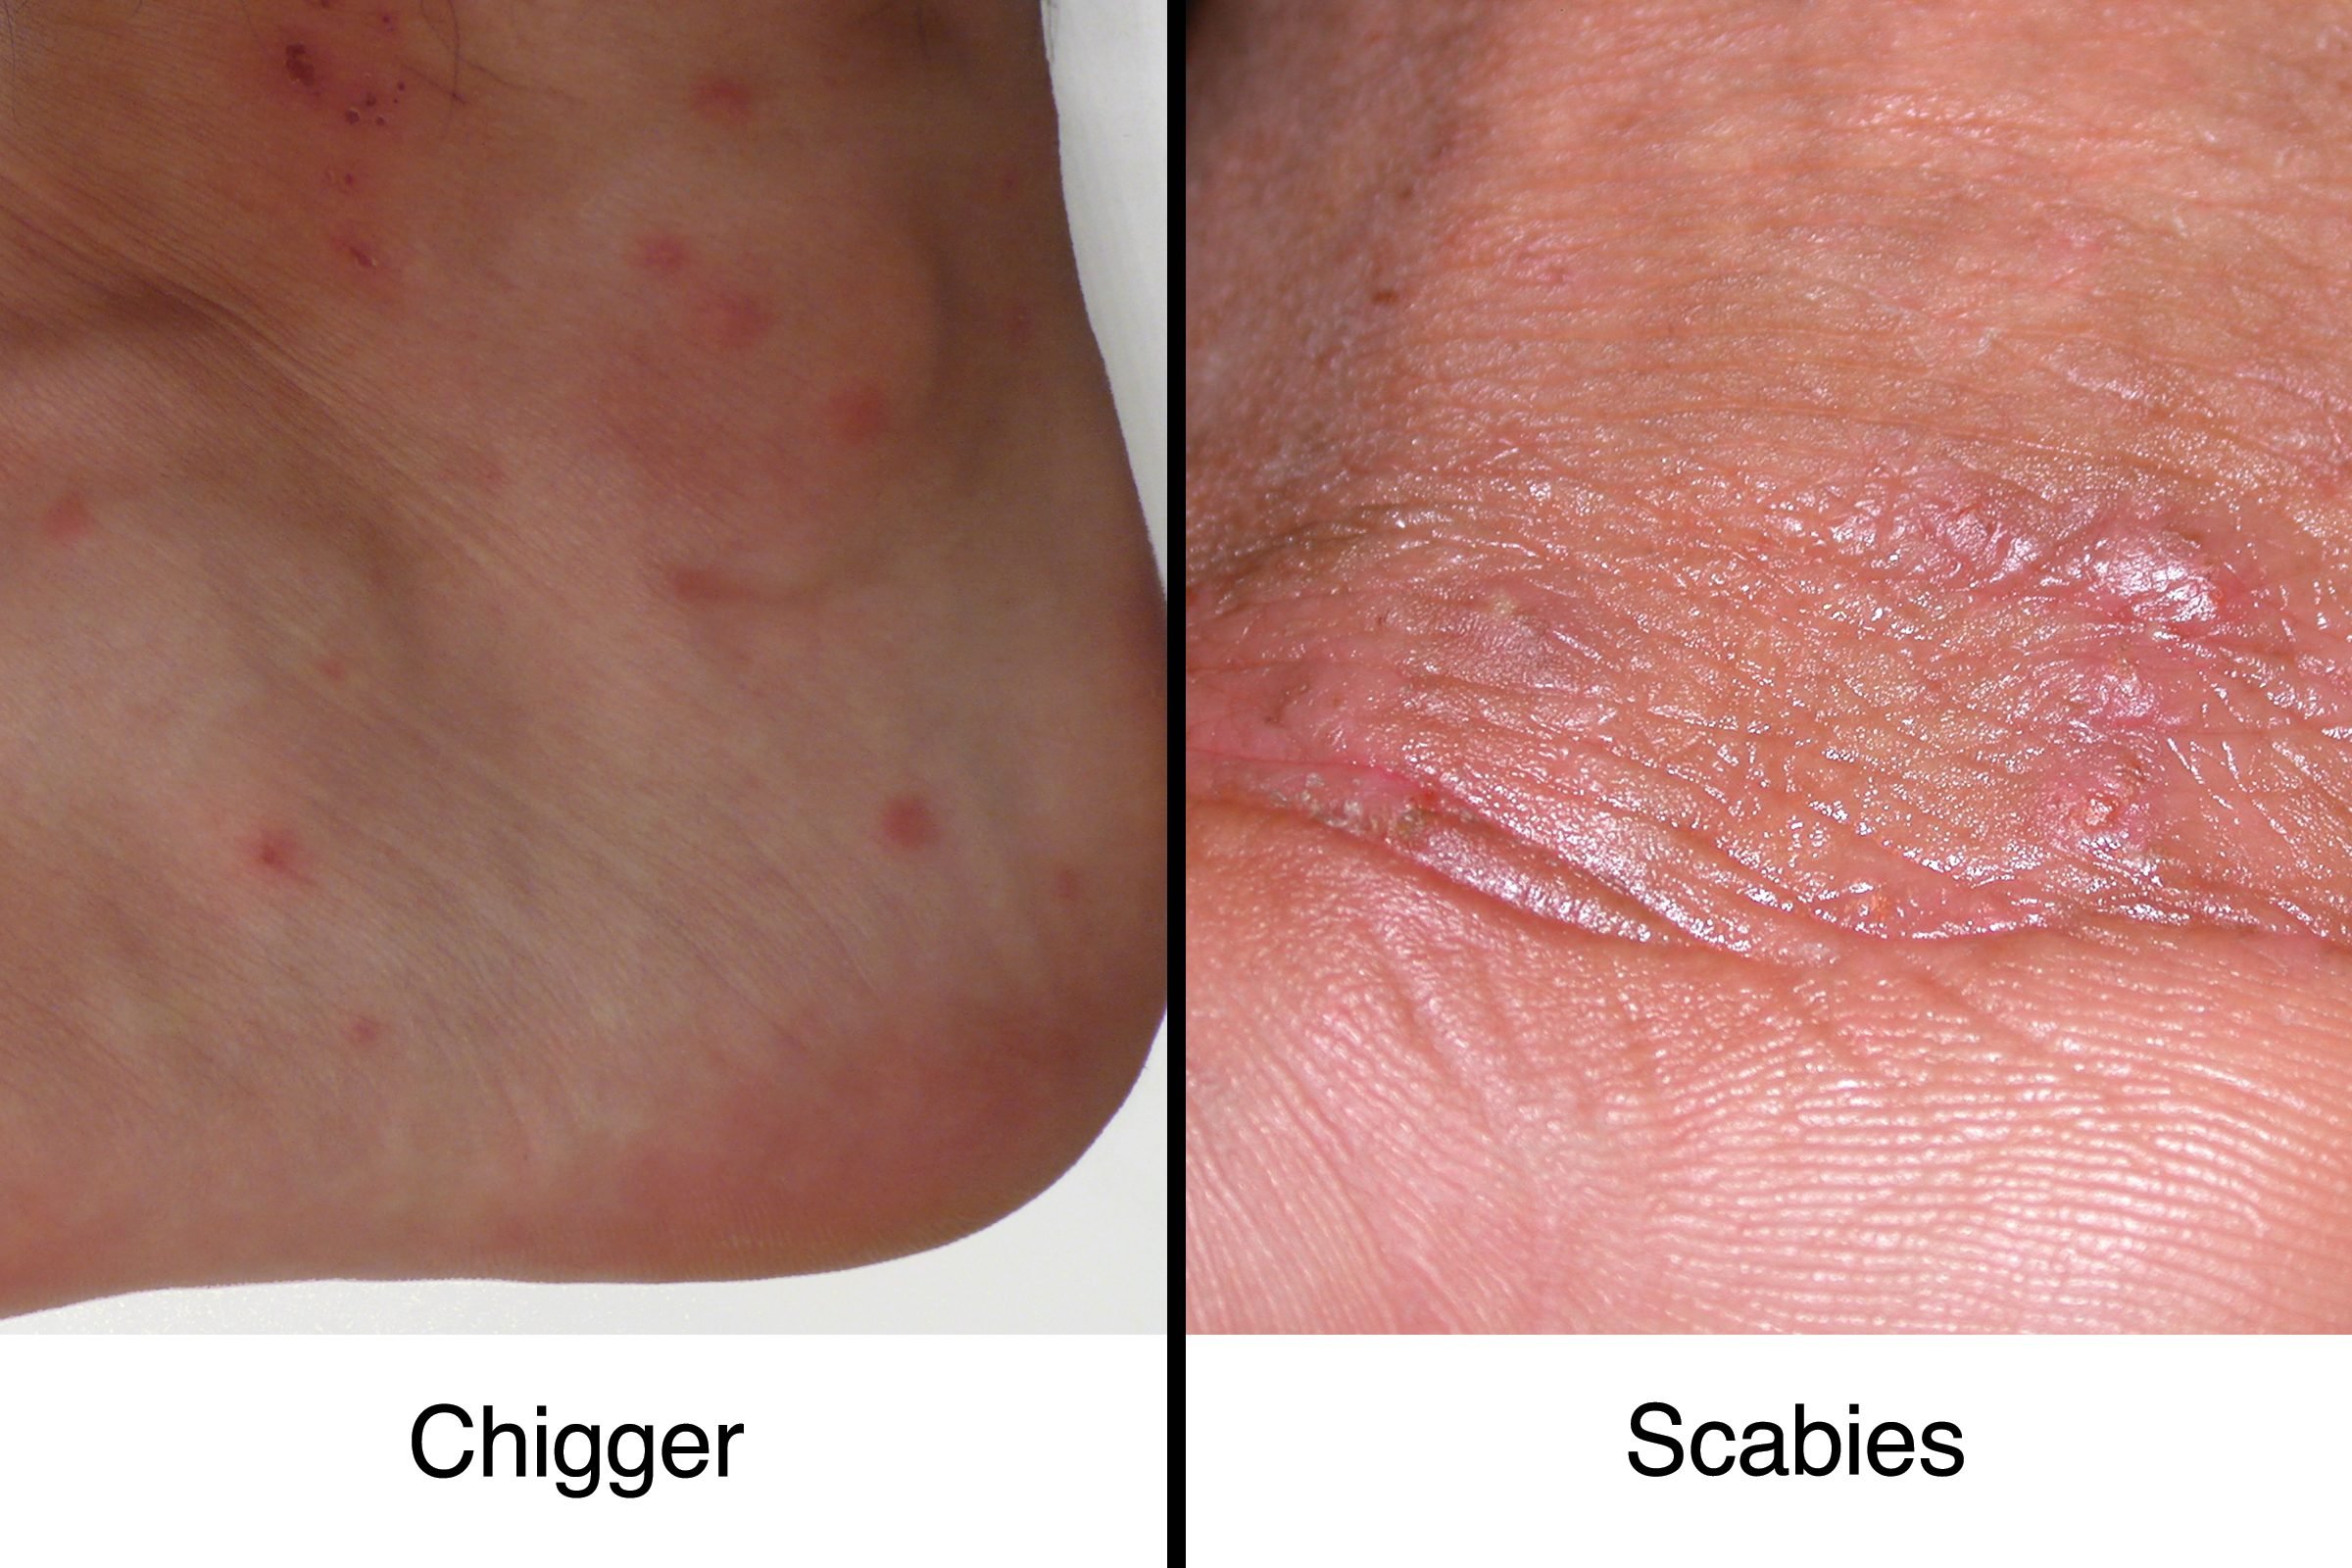 Chigger Bites vs. Scabies: How to Tell the Difference | The Healthy